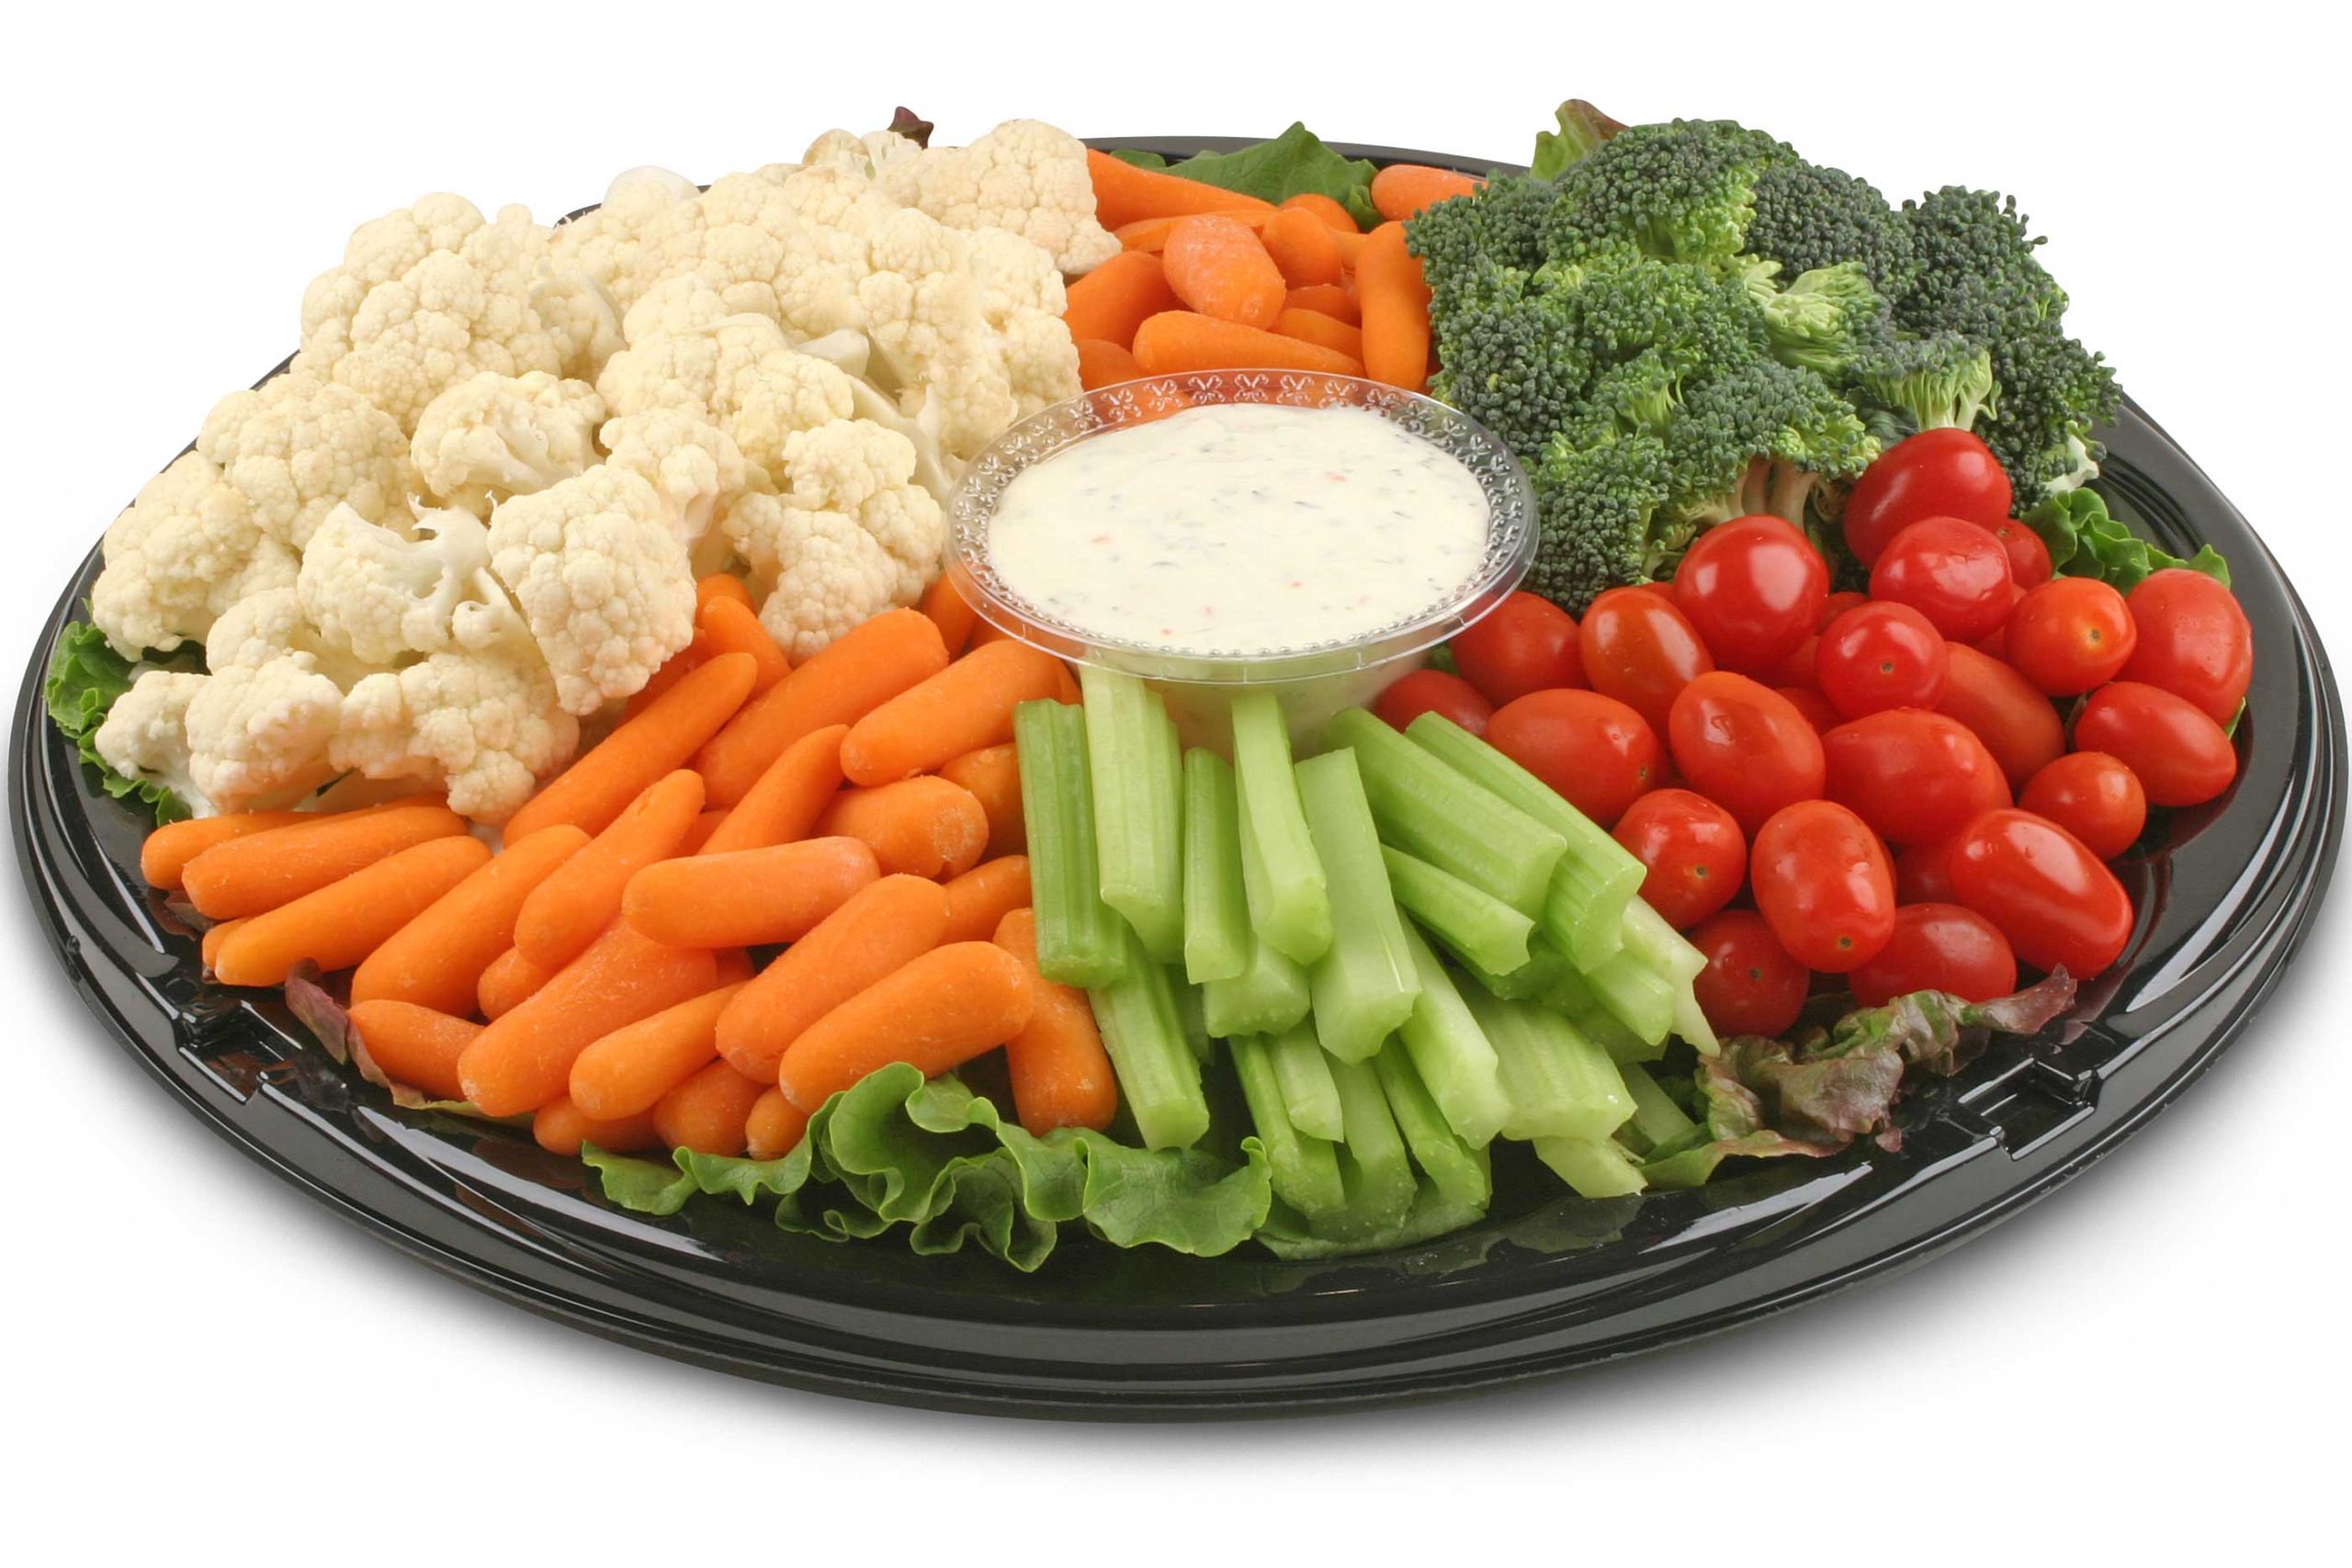 Fruit or Vegetable Tray